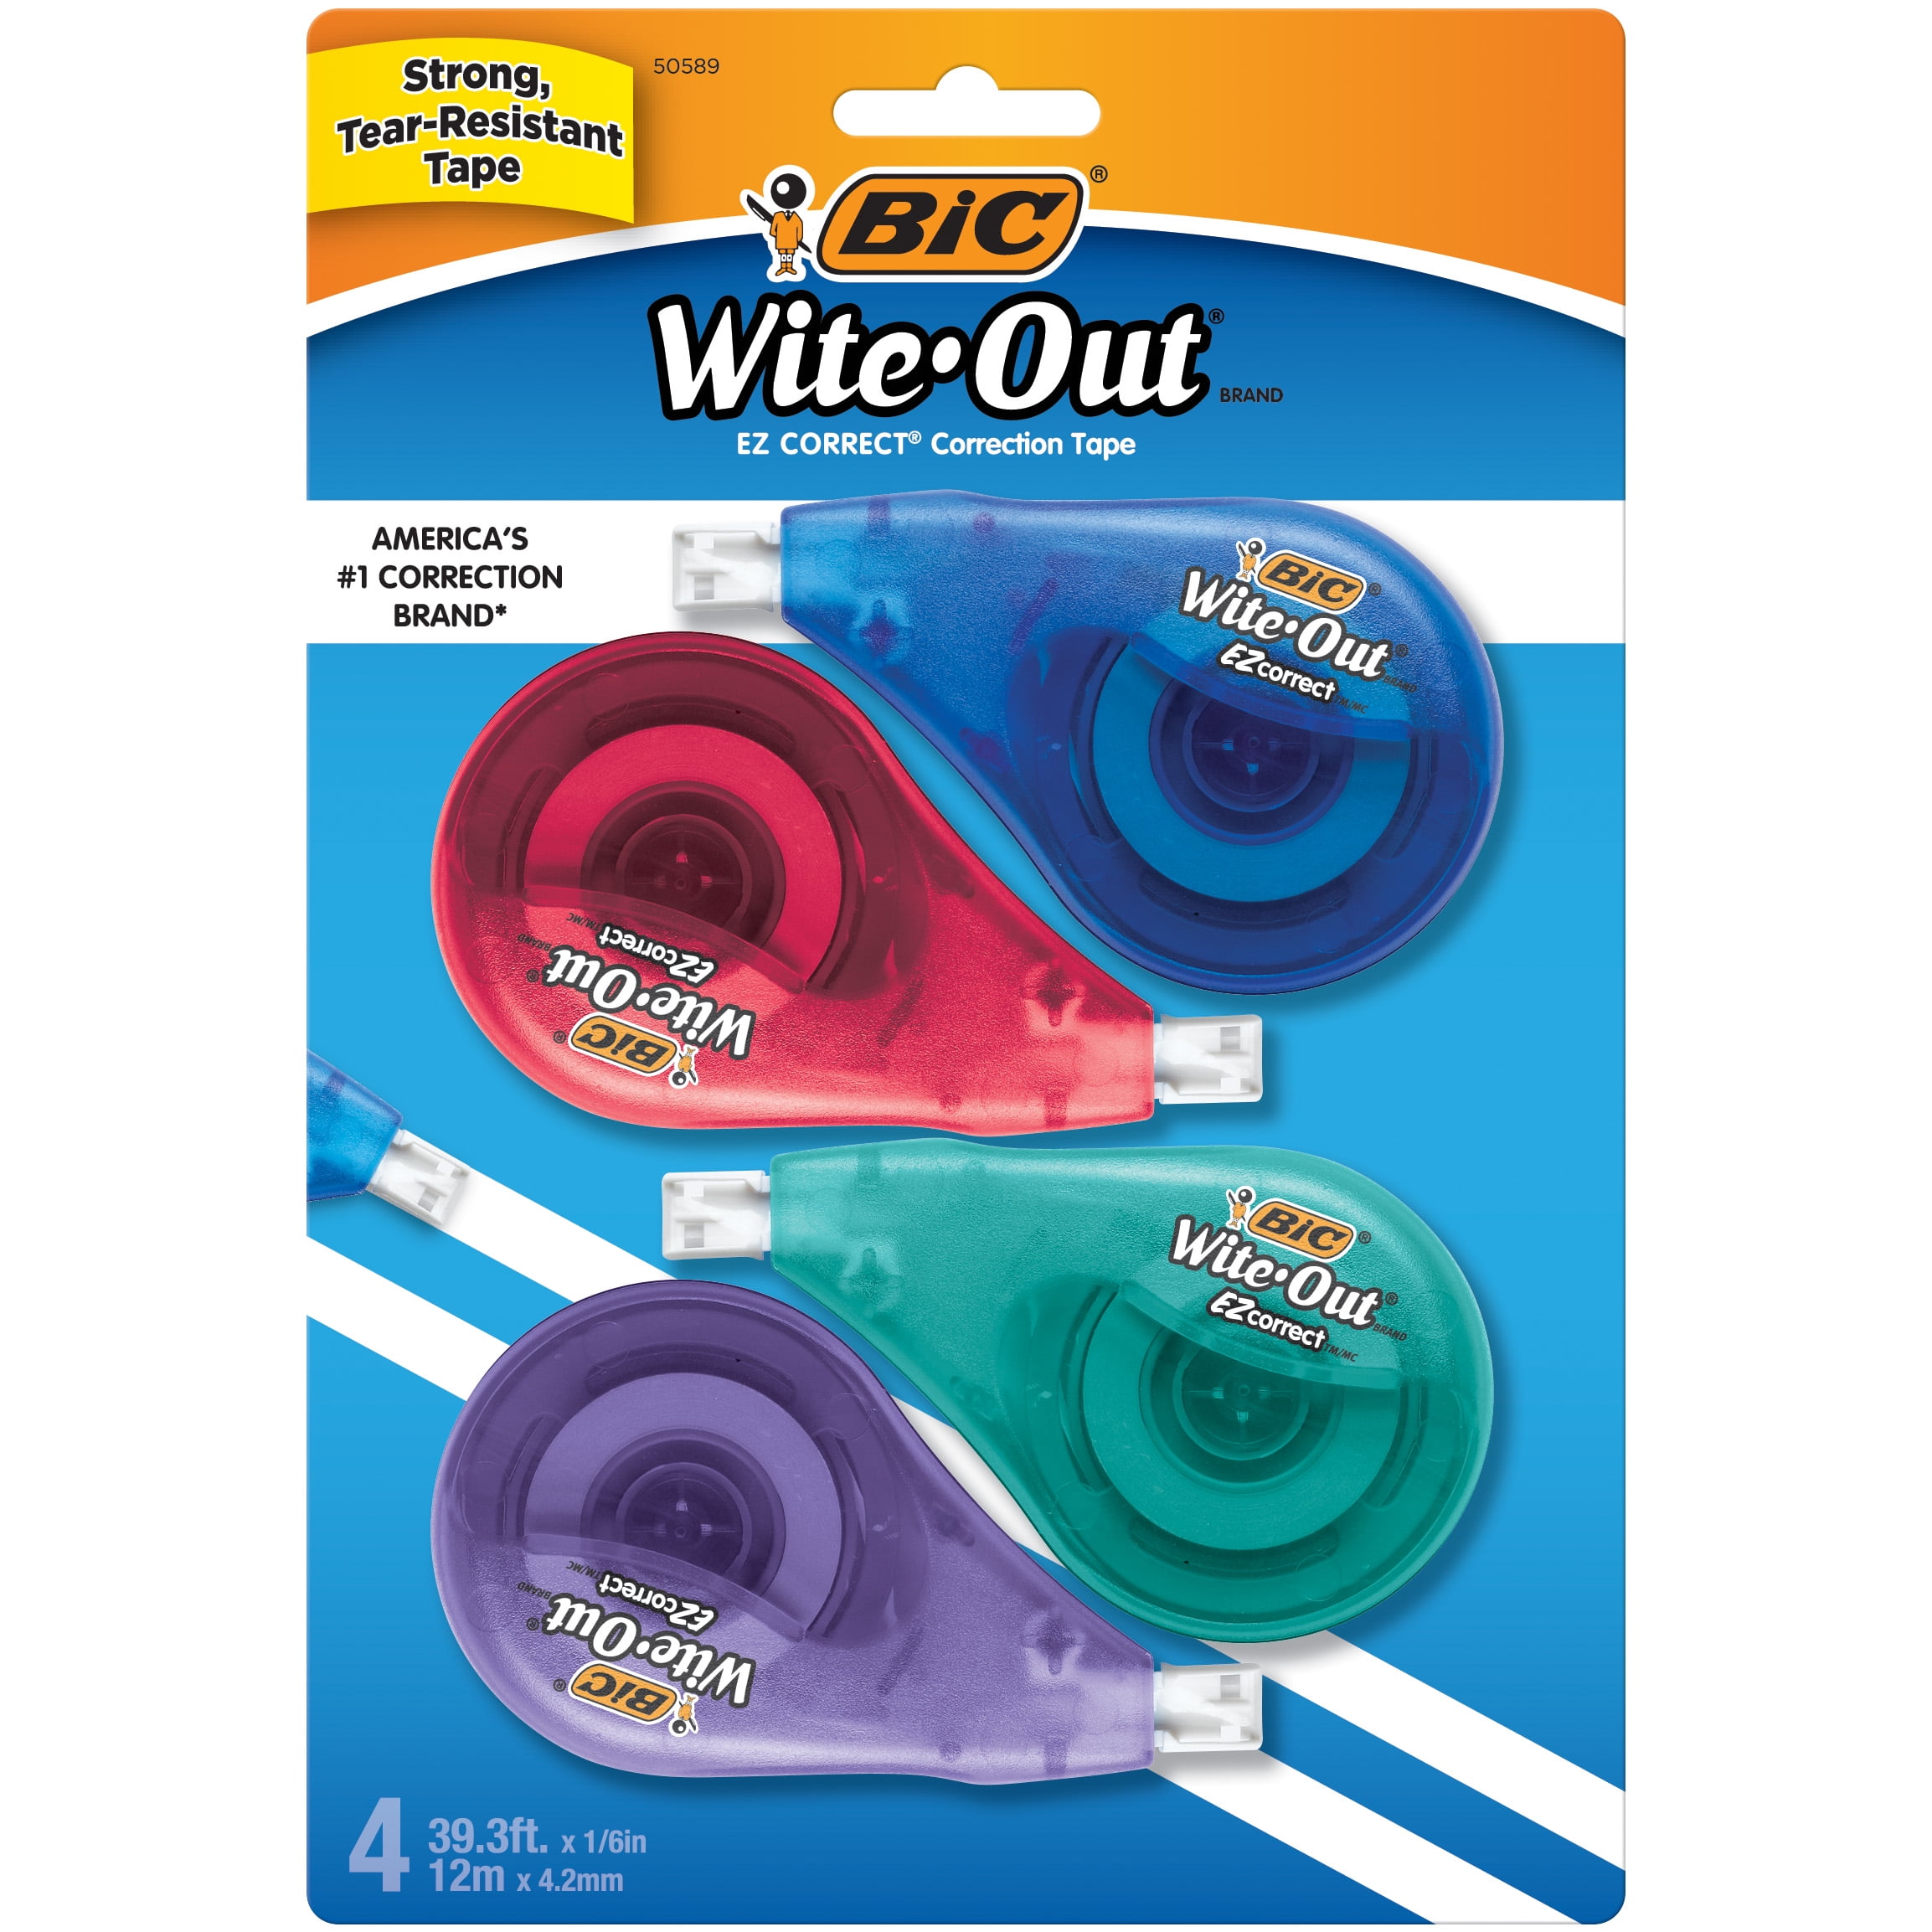 BIC Wite-Out Brand EZ Correct Correction Tape, White, 4 Count